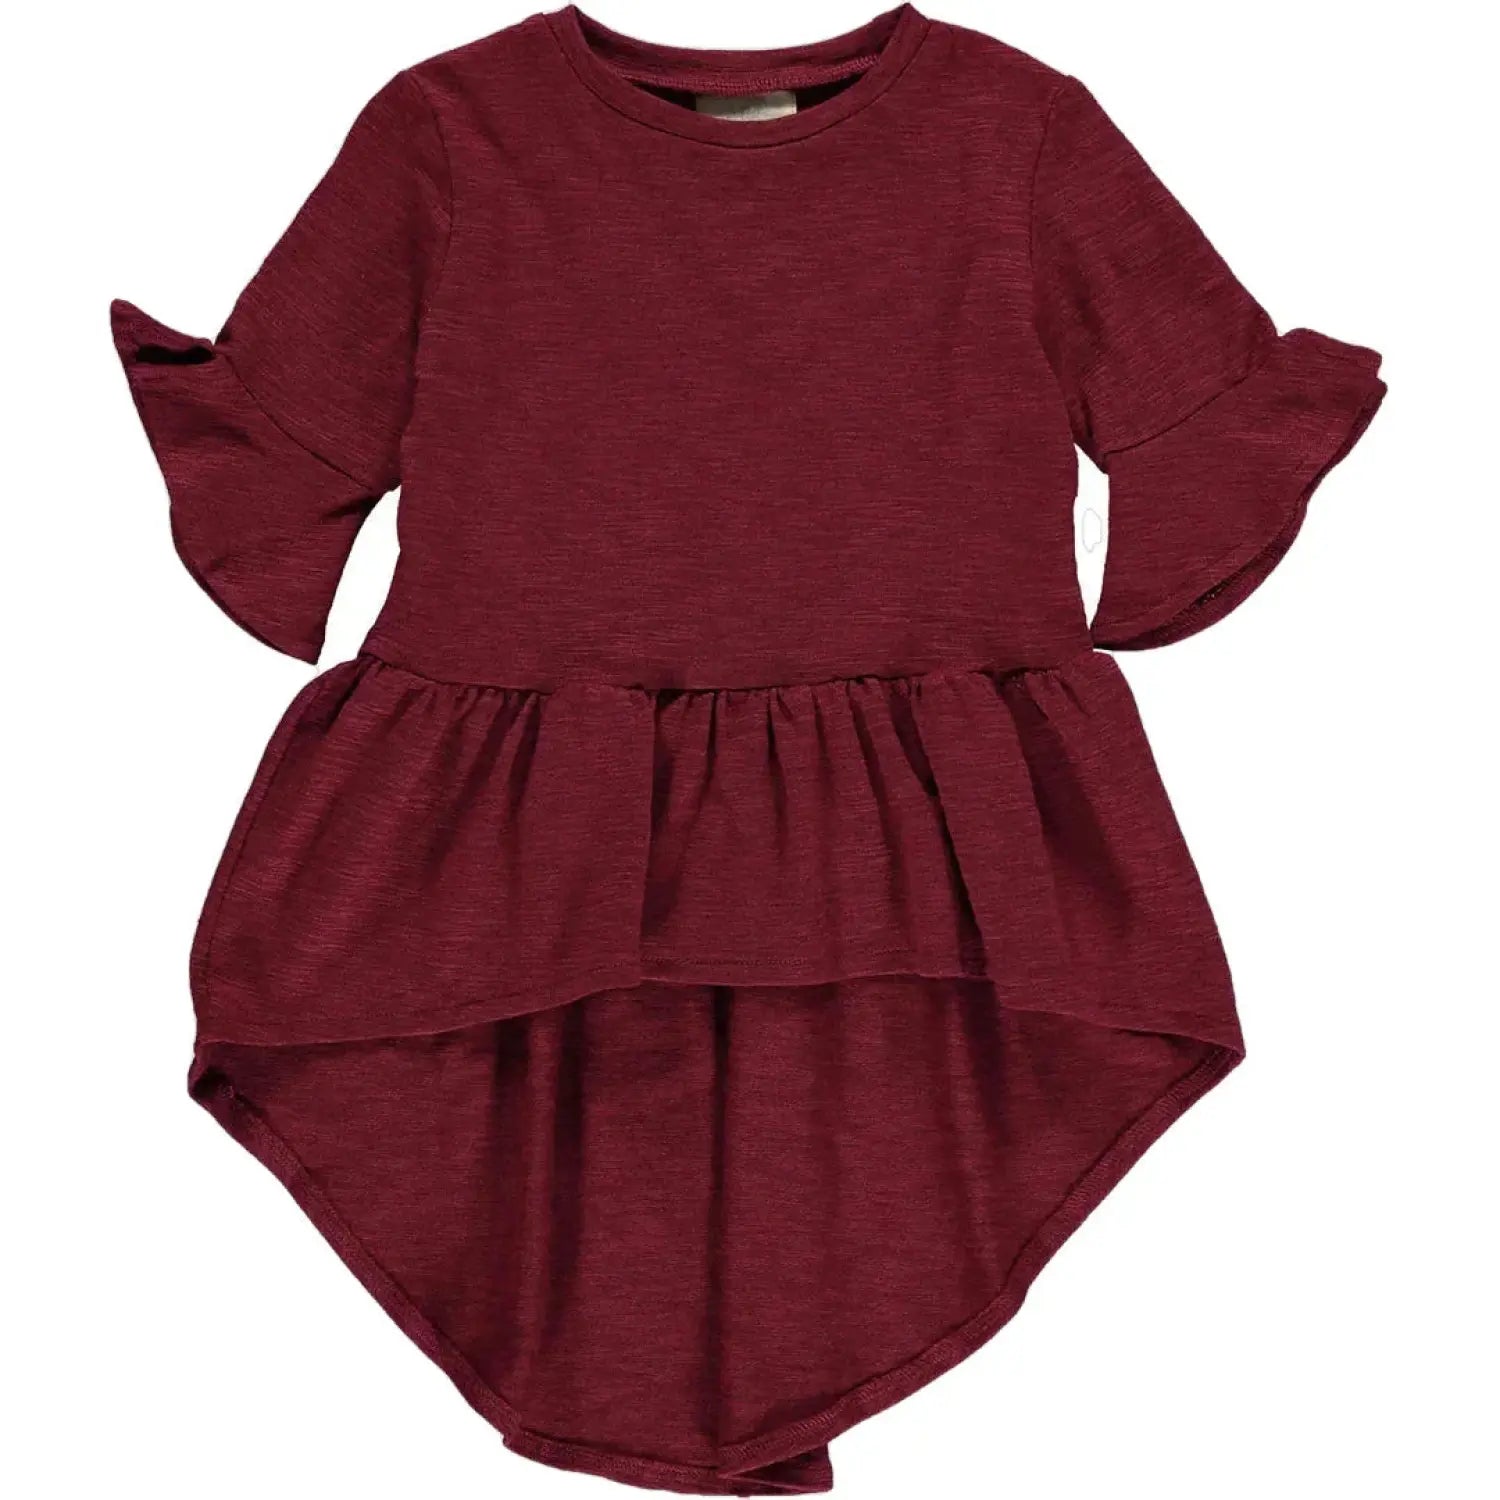 Vignette G's Dawn High Low Shirt, Maroon, front view